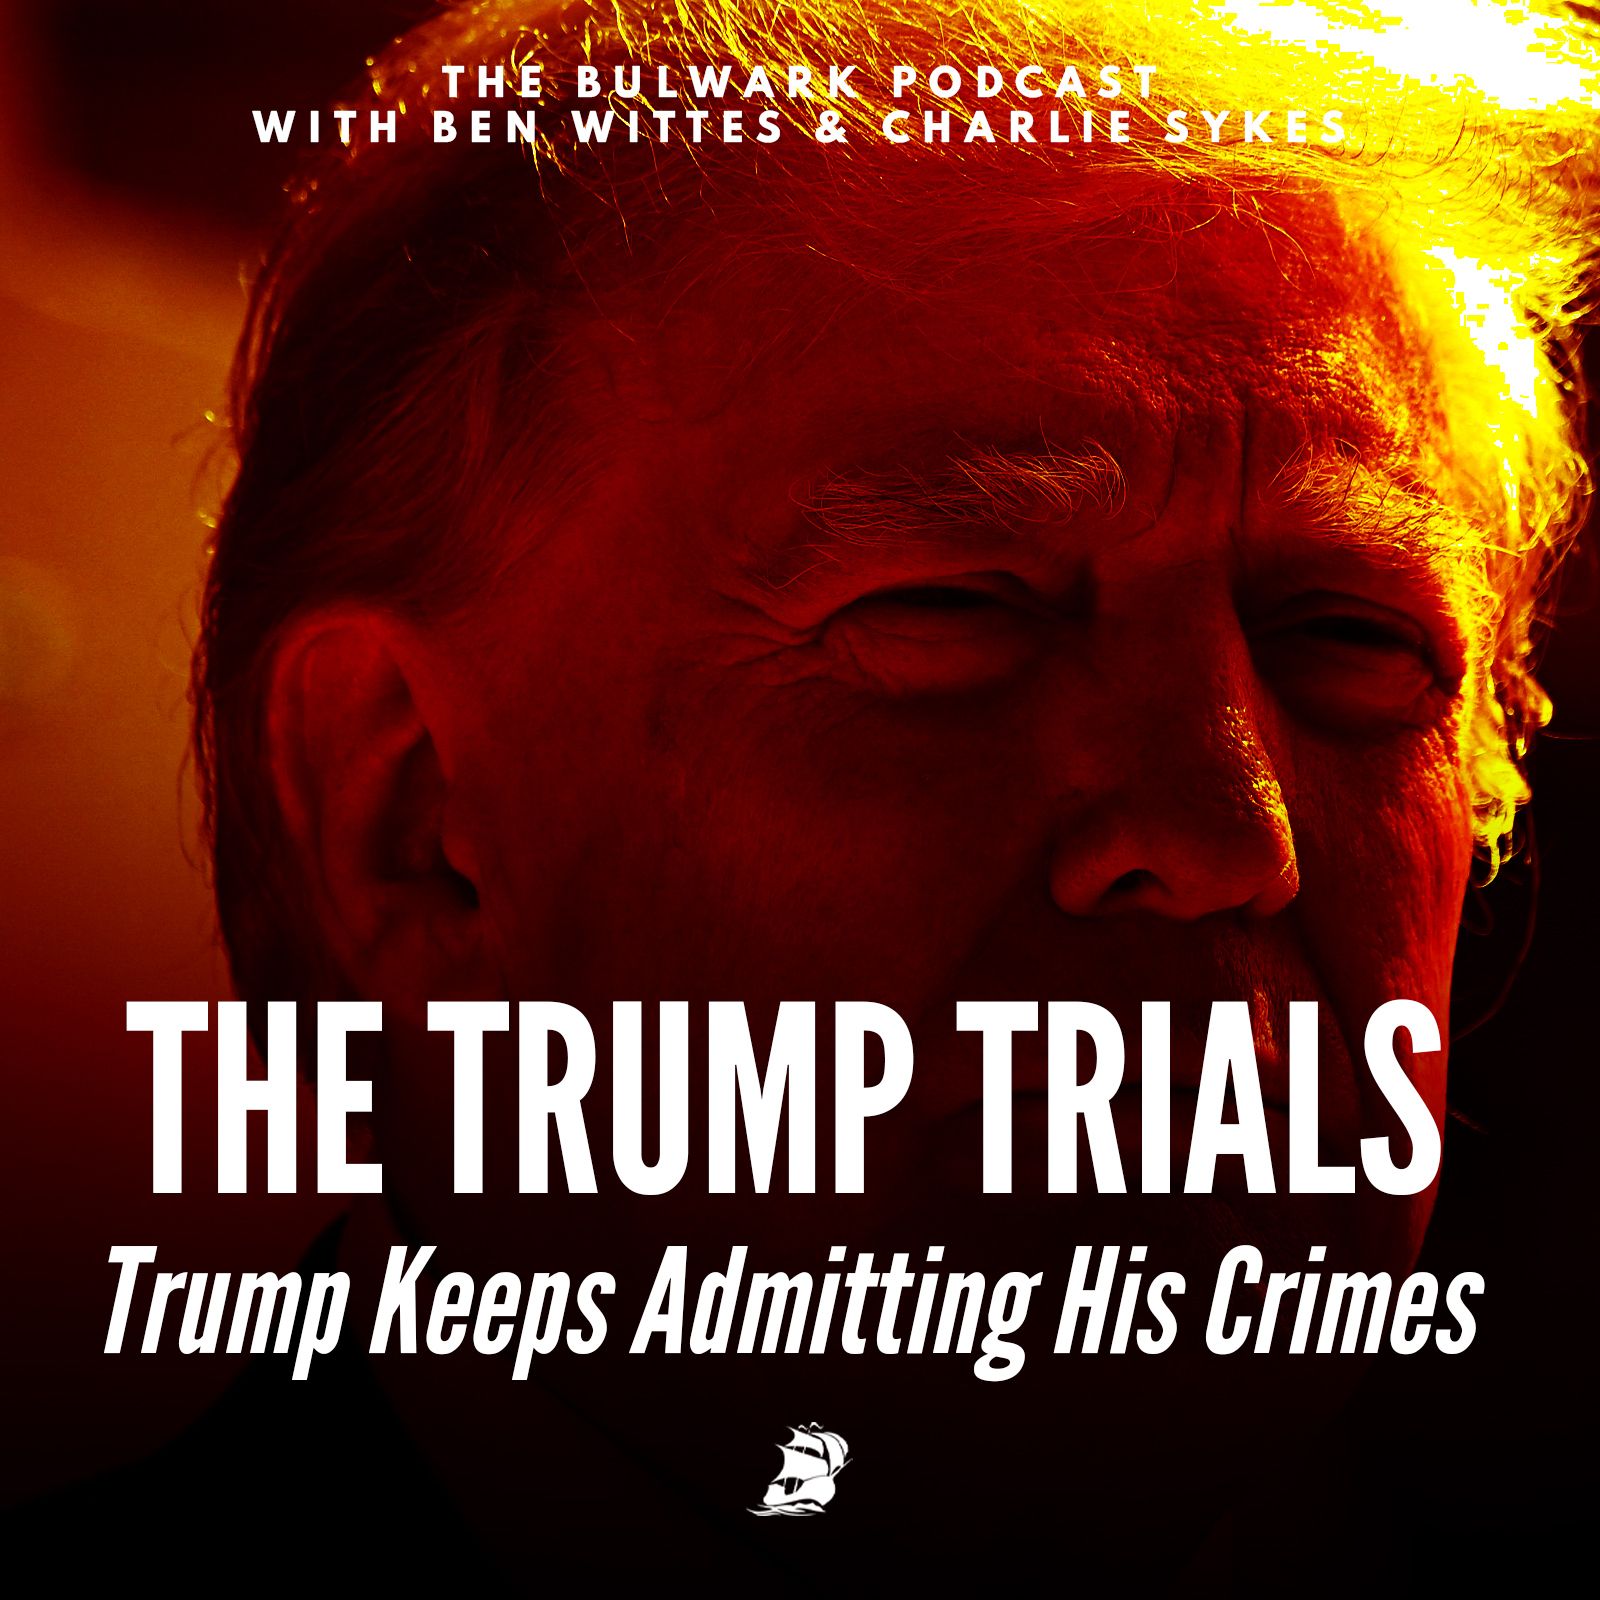 Trump Keeps Admitting His Crimes by The Bulwark Podcast